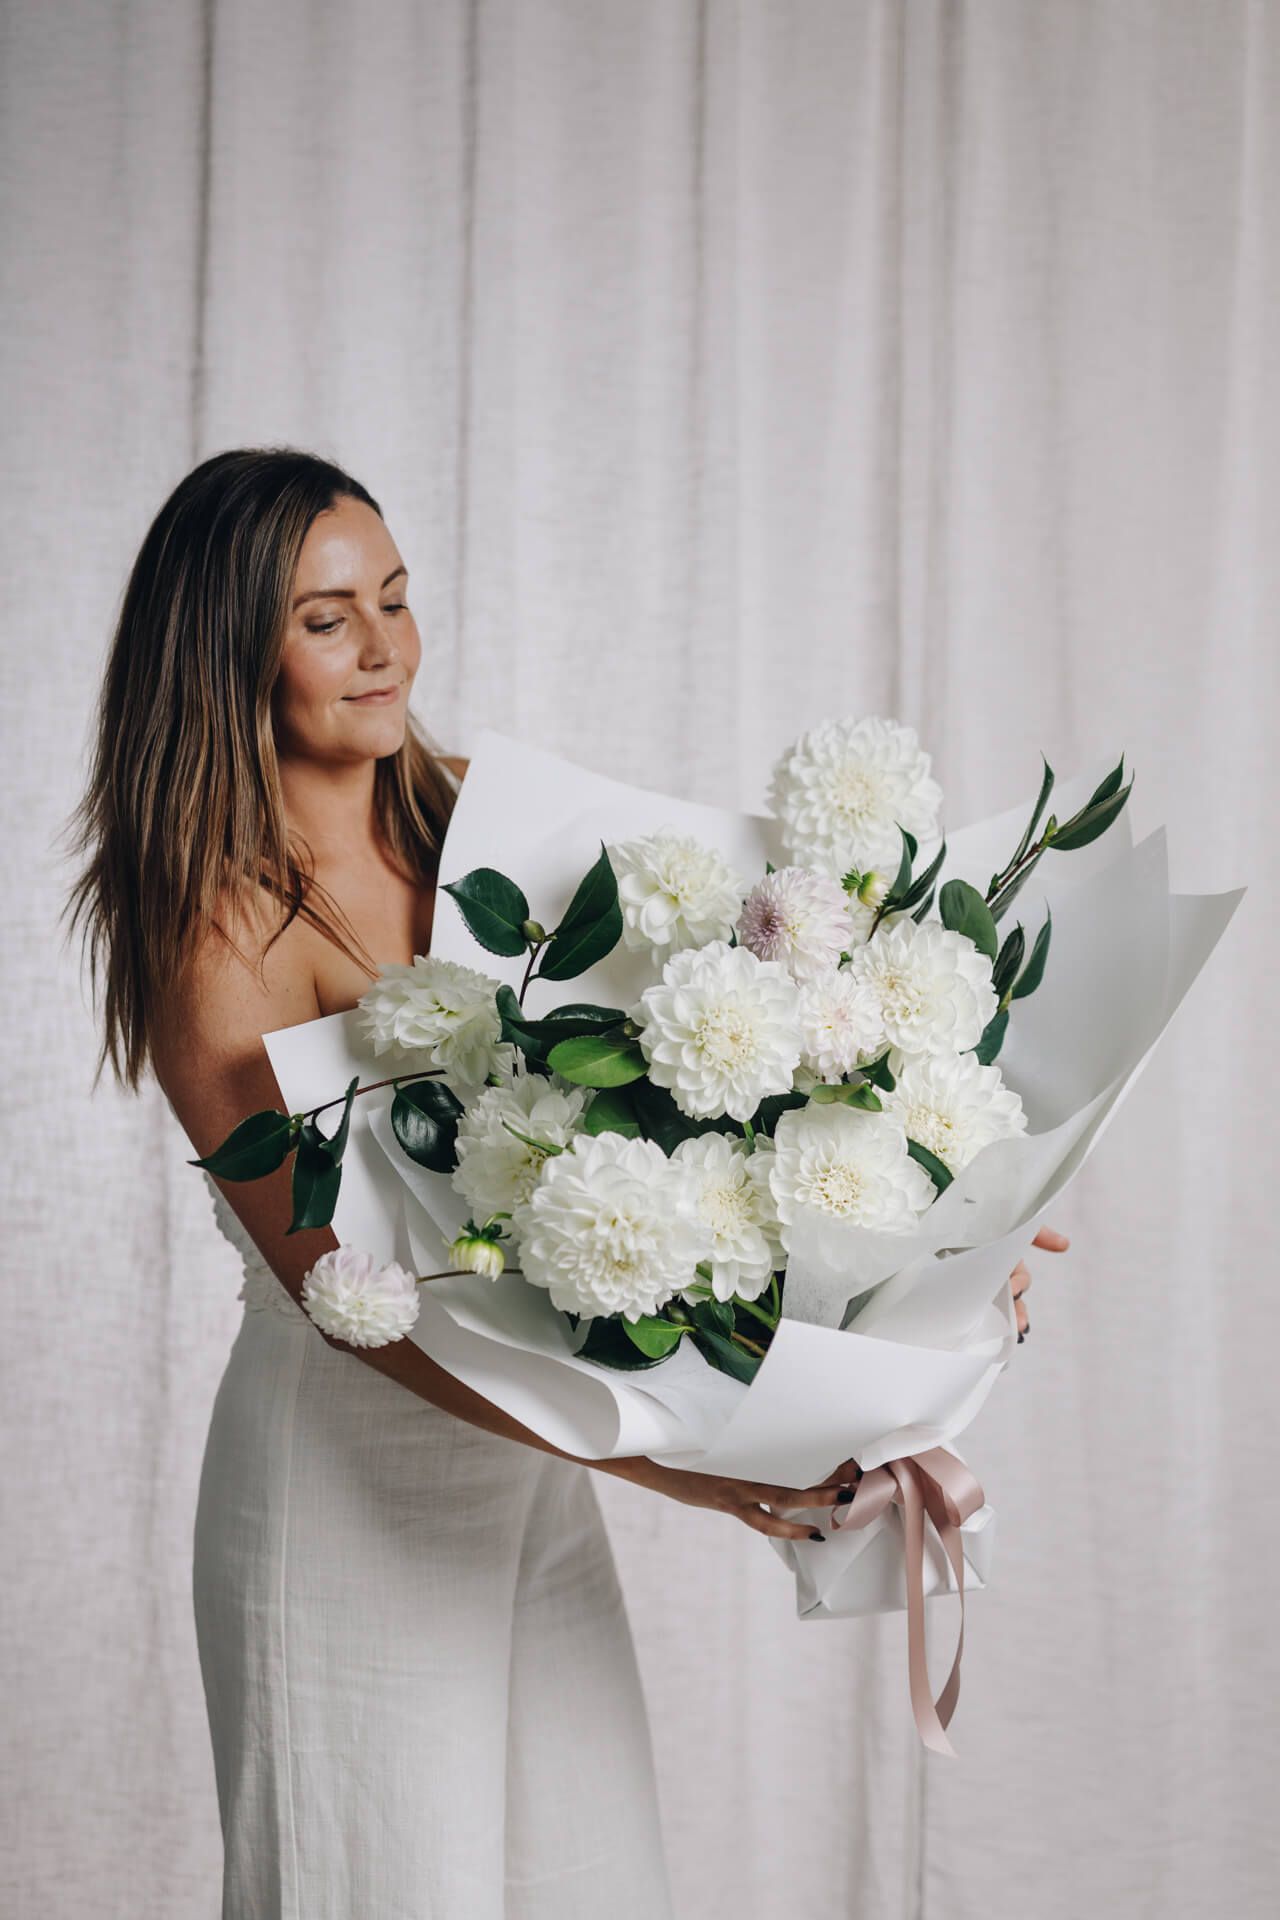 A Woman Holding a Bouquet of White Flower — Florist in Wollongong, NSW